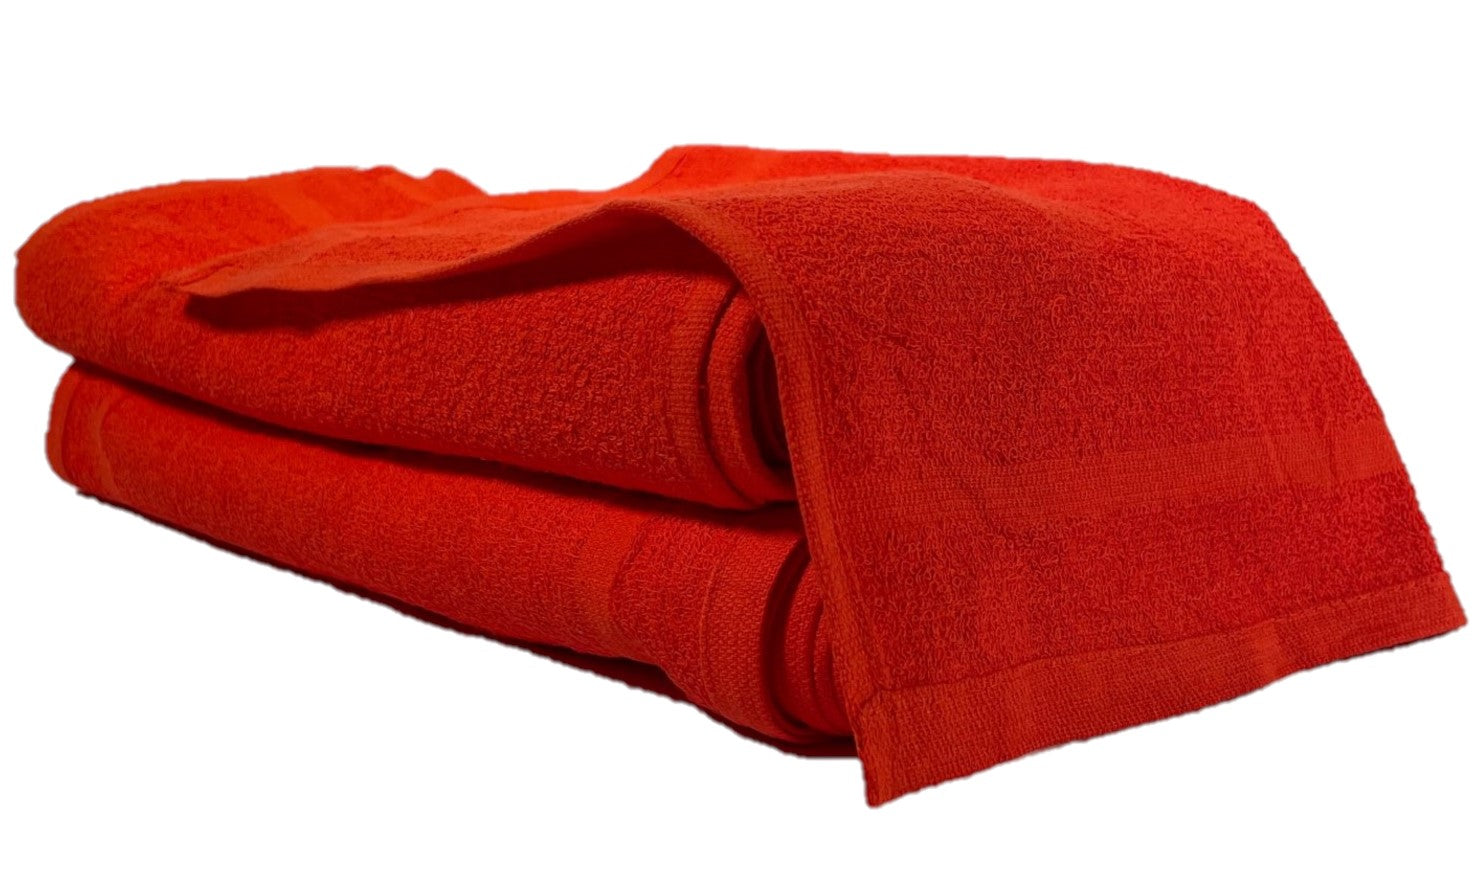 Partex Essentials™ 12" x 12" Towel - Limited Time Pricing